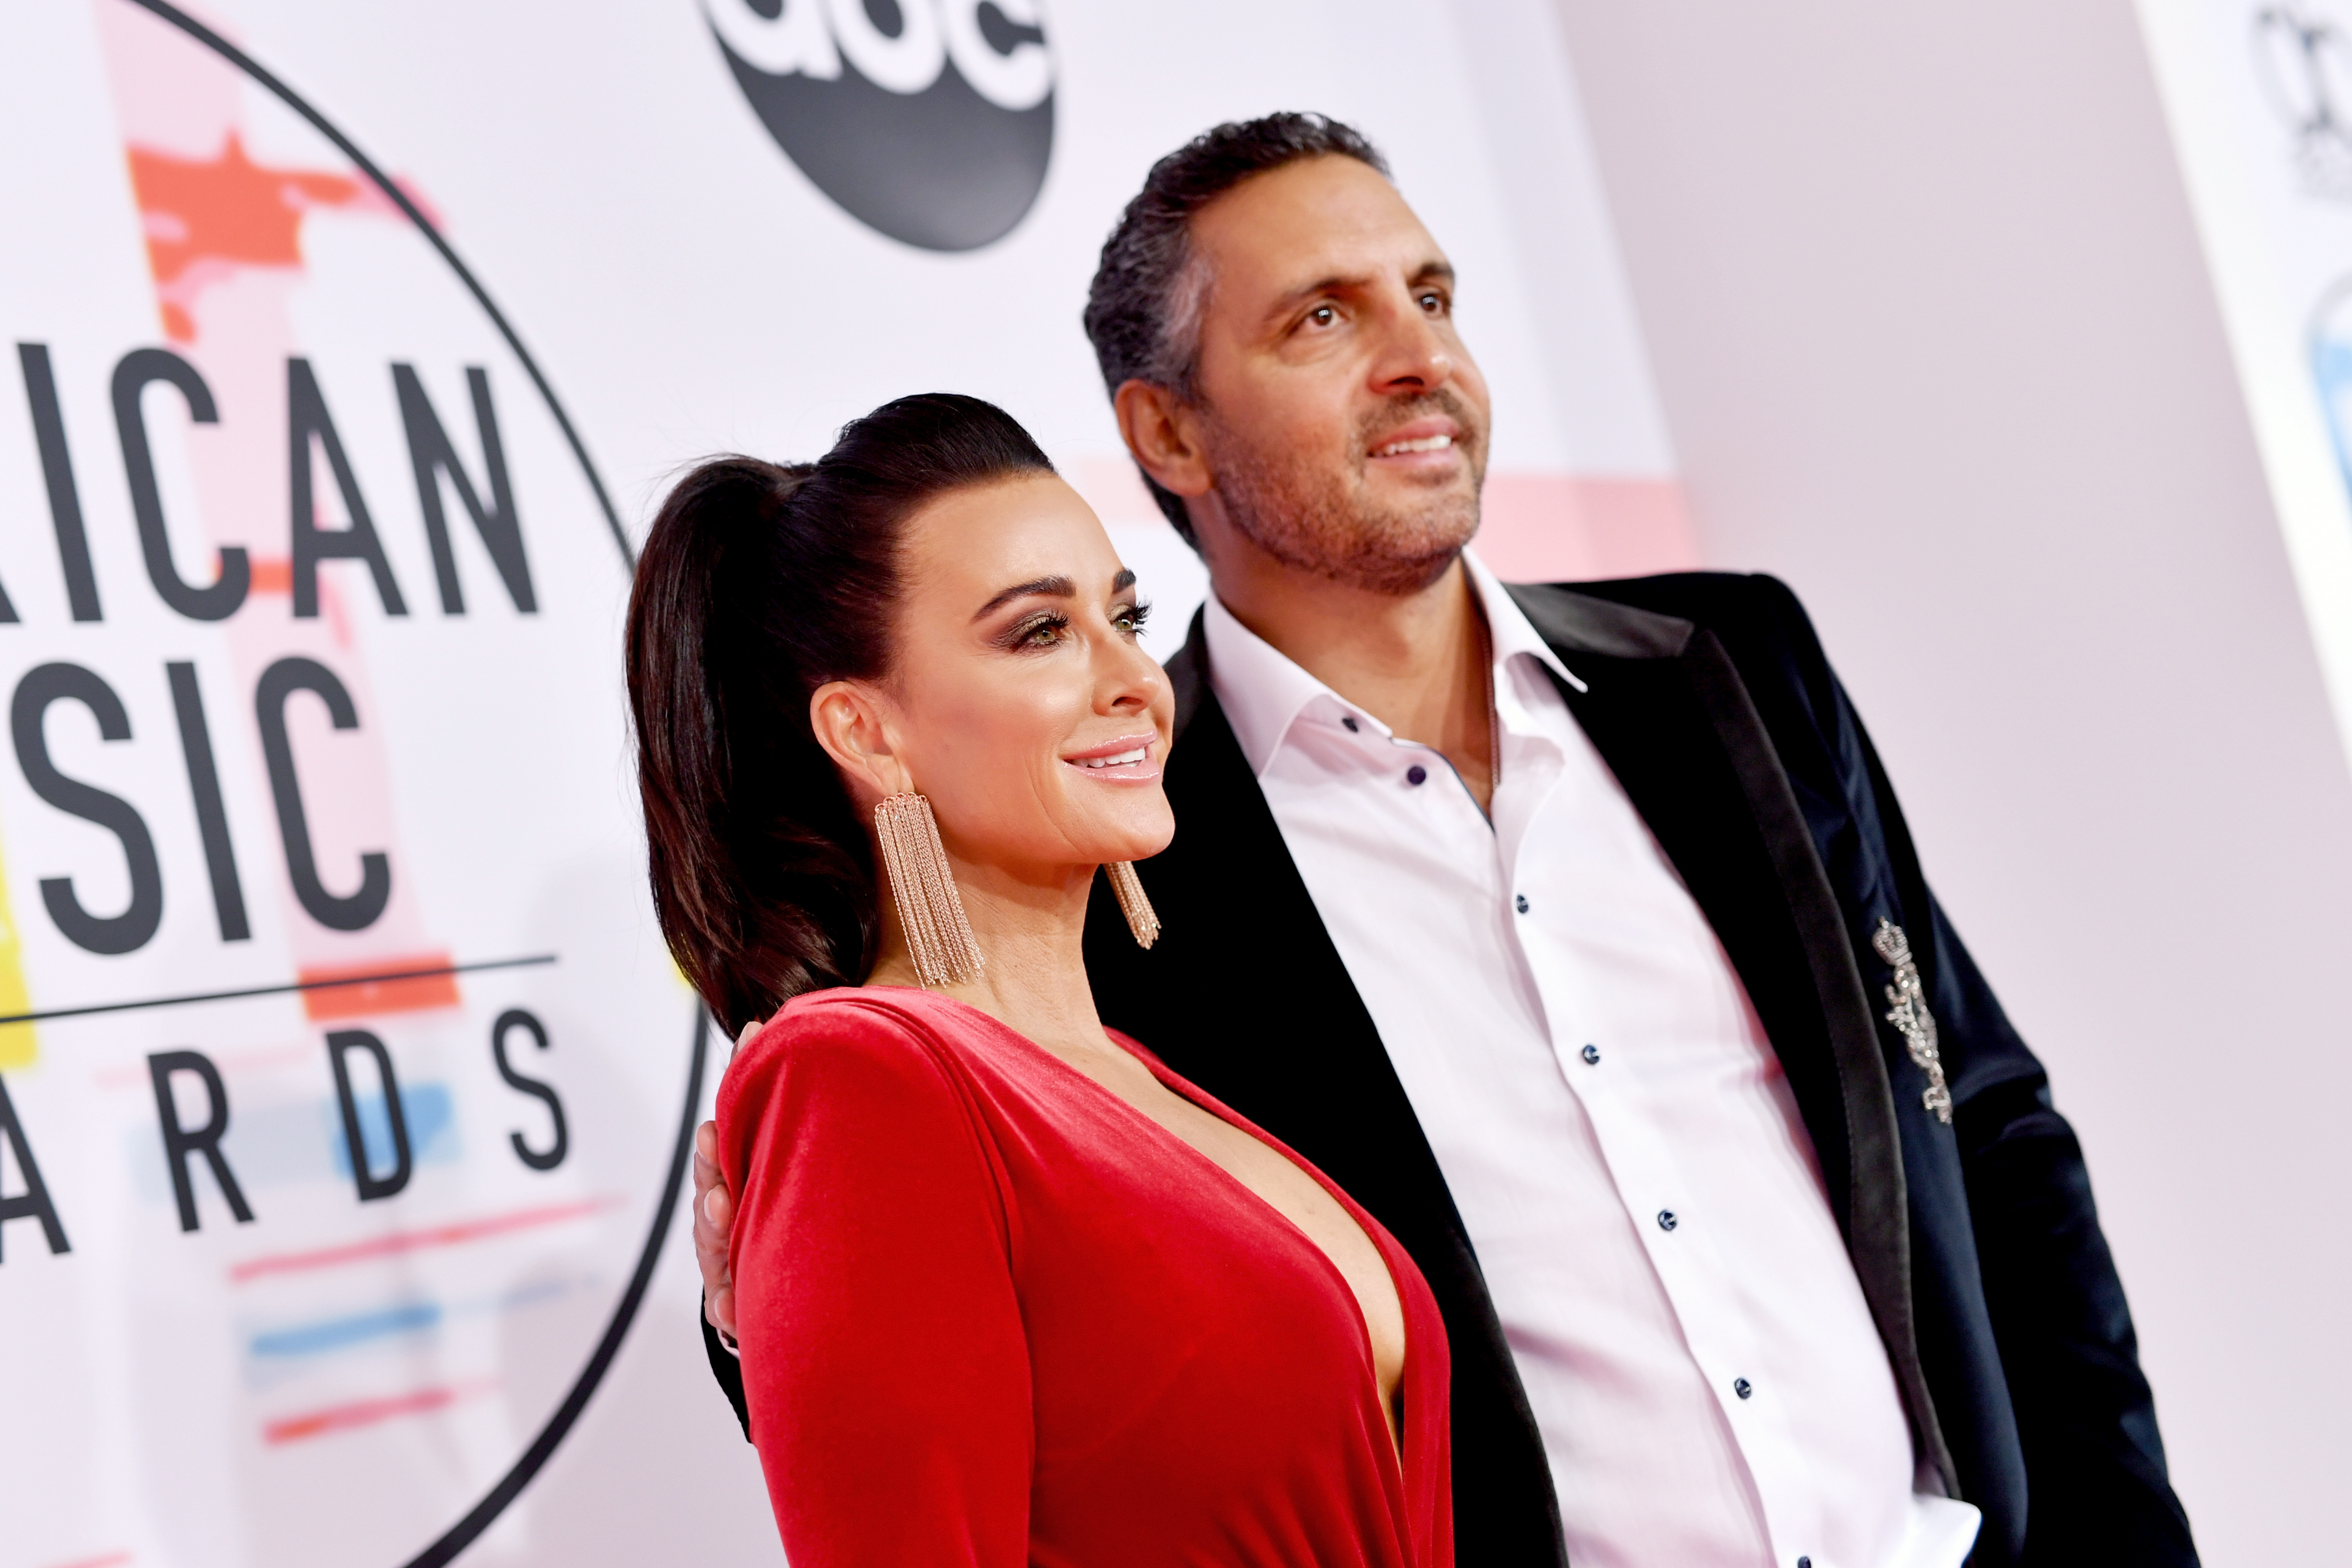 <p><span>"The Real Housewives of Beverly Hills" star Kyle Richards and husband Mauricio Umansky, the founder and CEO of high-end real estate brokerage The Agency, opened up to </span><a href="https://www.theknot.com/content/kyle-richards-marriage">The Knot</a><span> in November 2021 about <a href="https://www.wonderwall.com/celebrity/couples/tk-plus-more-celeb-love-news-520063.gallery?photoId=1035299">how they met nearly three decades earlier</a> at a Hollywood nightclub when he mistook her for Demi Moore's sister. "He worked up the courage to come over and say hello, thinking that I was her sister," Kyle recalled. Chimed in her hubby, "I figured if I couldn't get Demi Moore, I could try to get her sister!" The duo then agreed that the real estate mogul "got something way better" with Kyle. </span></p><p><span>"Other than the fact that she is absolutely gorgeous, she has an amazing soul. She's an amazing person. And quite honestly, the fact that she already had a daughter [Farrah, from her first marriage], it made dating a lot more important," Mauricio explained. "I had to take it much more seriously because I was responsible for a woman with a daughter. I also got insight into the way that she was as a mom and how good of a mom she was. And that gave me insight into the future and what it would look like." Added the mother of four, "The moment we started dating, I just felt like he was the one." </span></p><p><a href="https://www.wonderwall.com/celebrity/couples/long-lasting-reality-tv-romance-422871.gallery?photoId=1035299">The long-term couple</a><span> also dished on their engagement, revealing that Mauricio popped the question at a restaurant in Santa Monica and gave Farrah her own engagement ring because he "had to ask her to marry me too" — and wedding, which they moved up three months so Kyle's dress "would still fit" when she unexpectedly got pregnant with daughter Alexia.</span></p><p>In June 2023, People magazine reported that <a href="https://www.wonderwall.com/celebrity/couples/what-went-wrong-kylie-jenner-and-travis-scott-are-off-again-following-late-2022-cheating-allegations-more-splits-of-2023-691804.gallery?photoId=758809">Kyle and Mauricio separated</a>.</p>